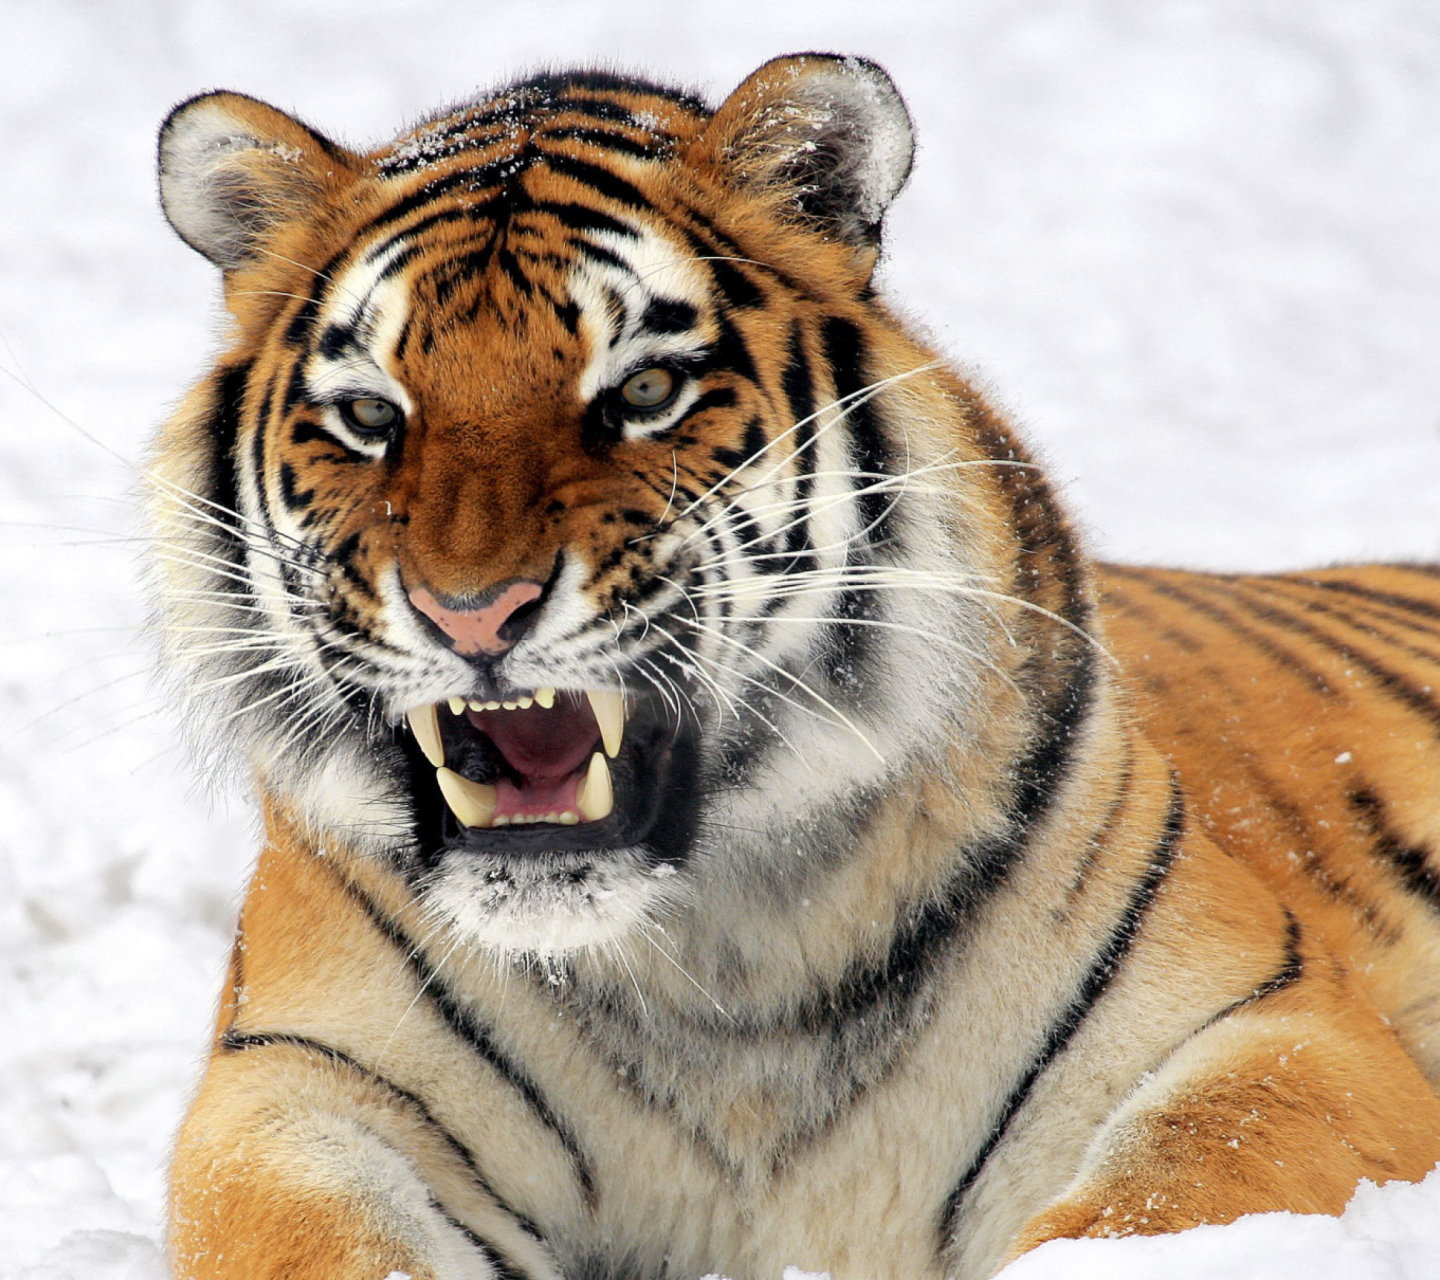 Tiger In The Snow screenshot #1 1440x1280